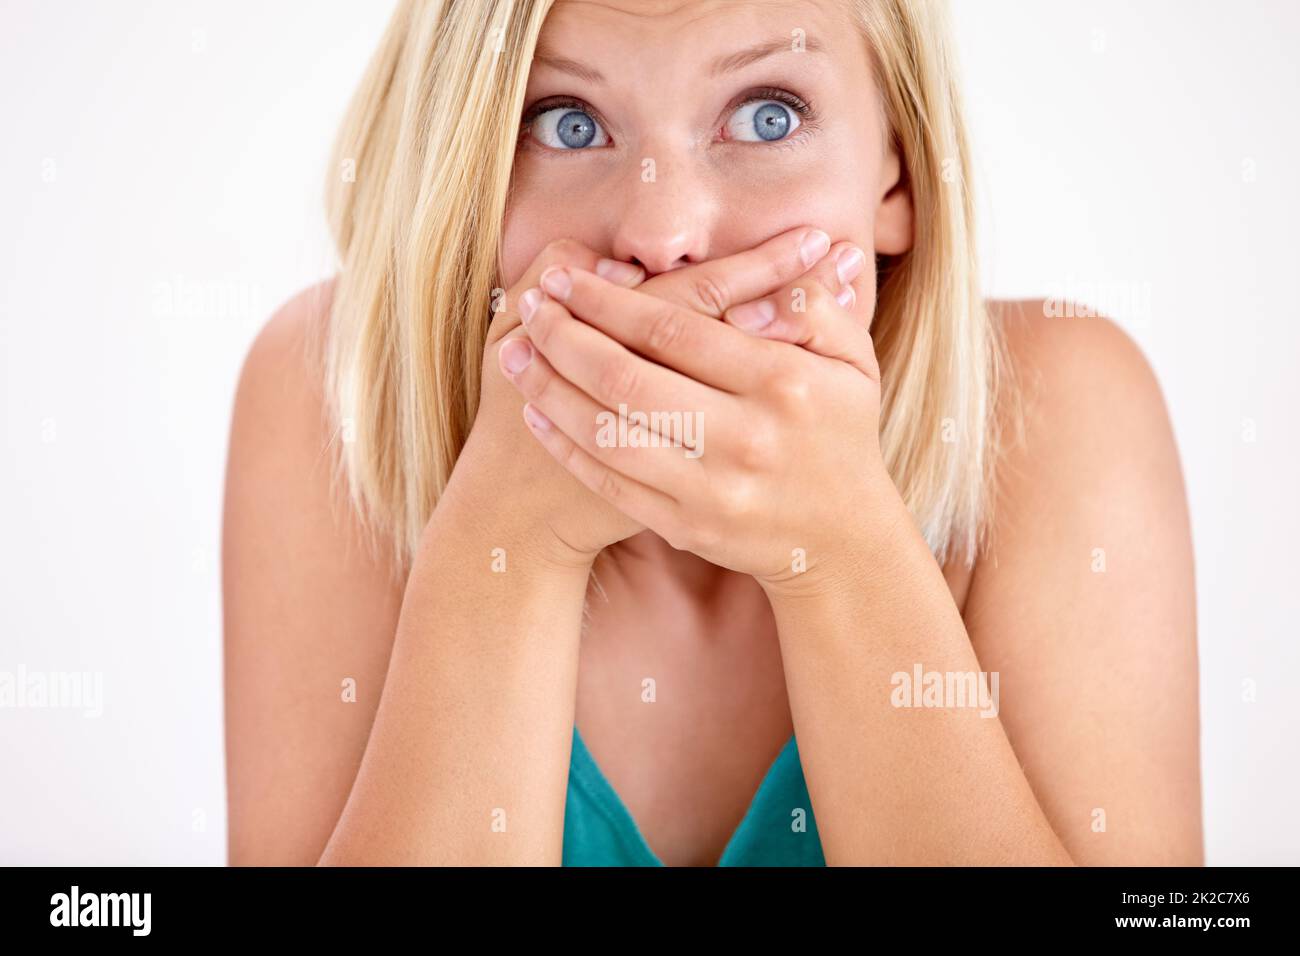 She cant believe it. A young woman holding her mouth in disbelief. Stock Photo